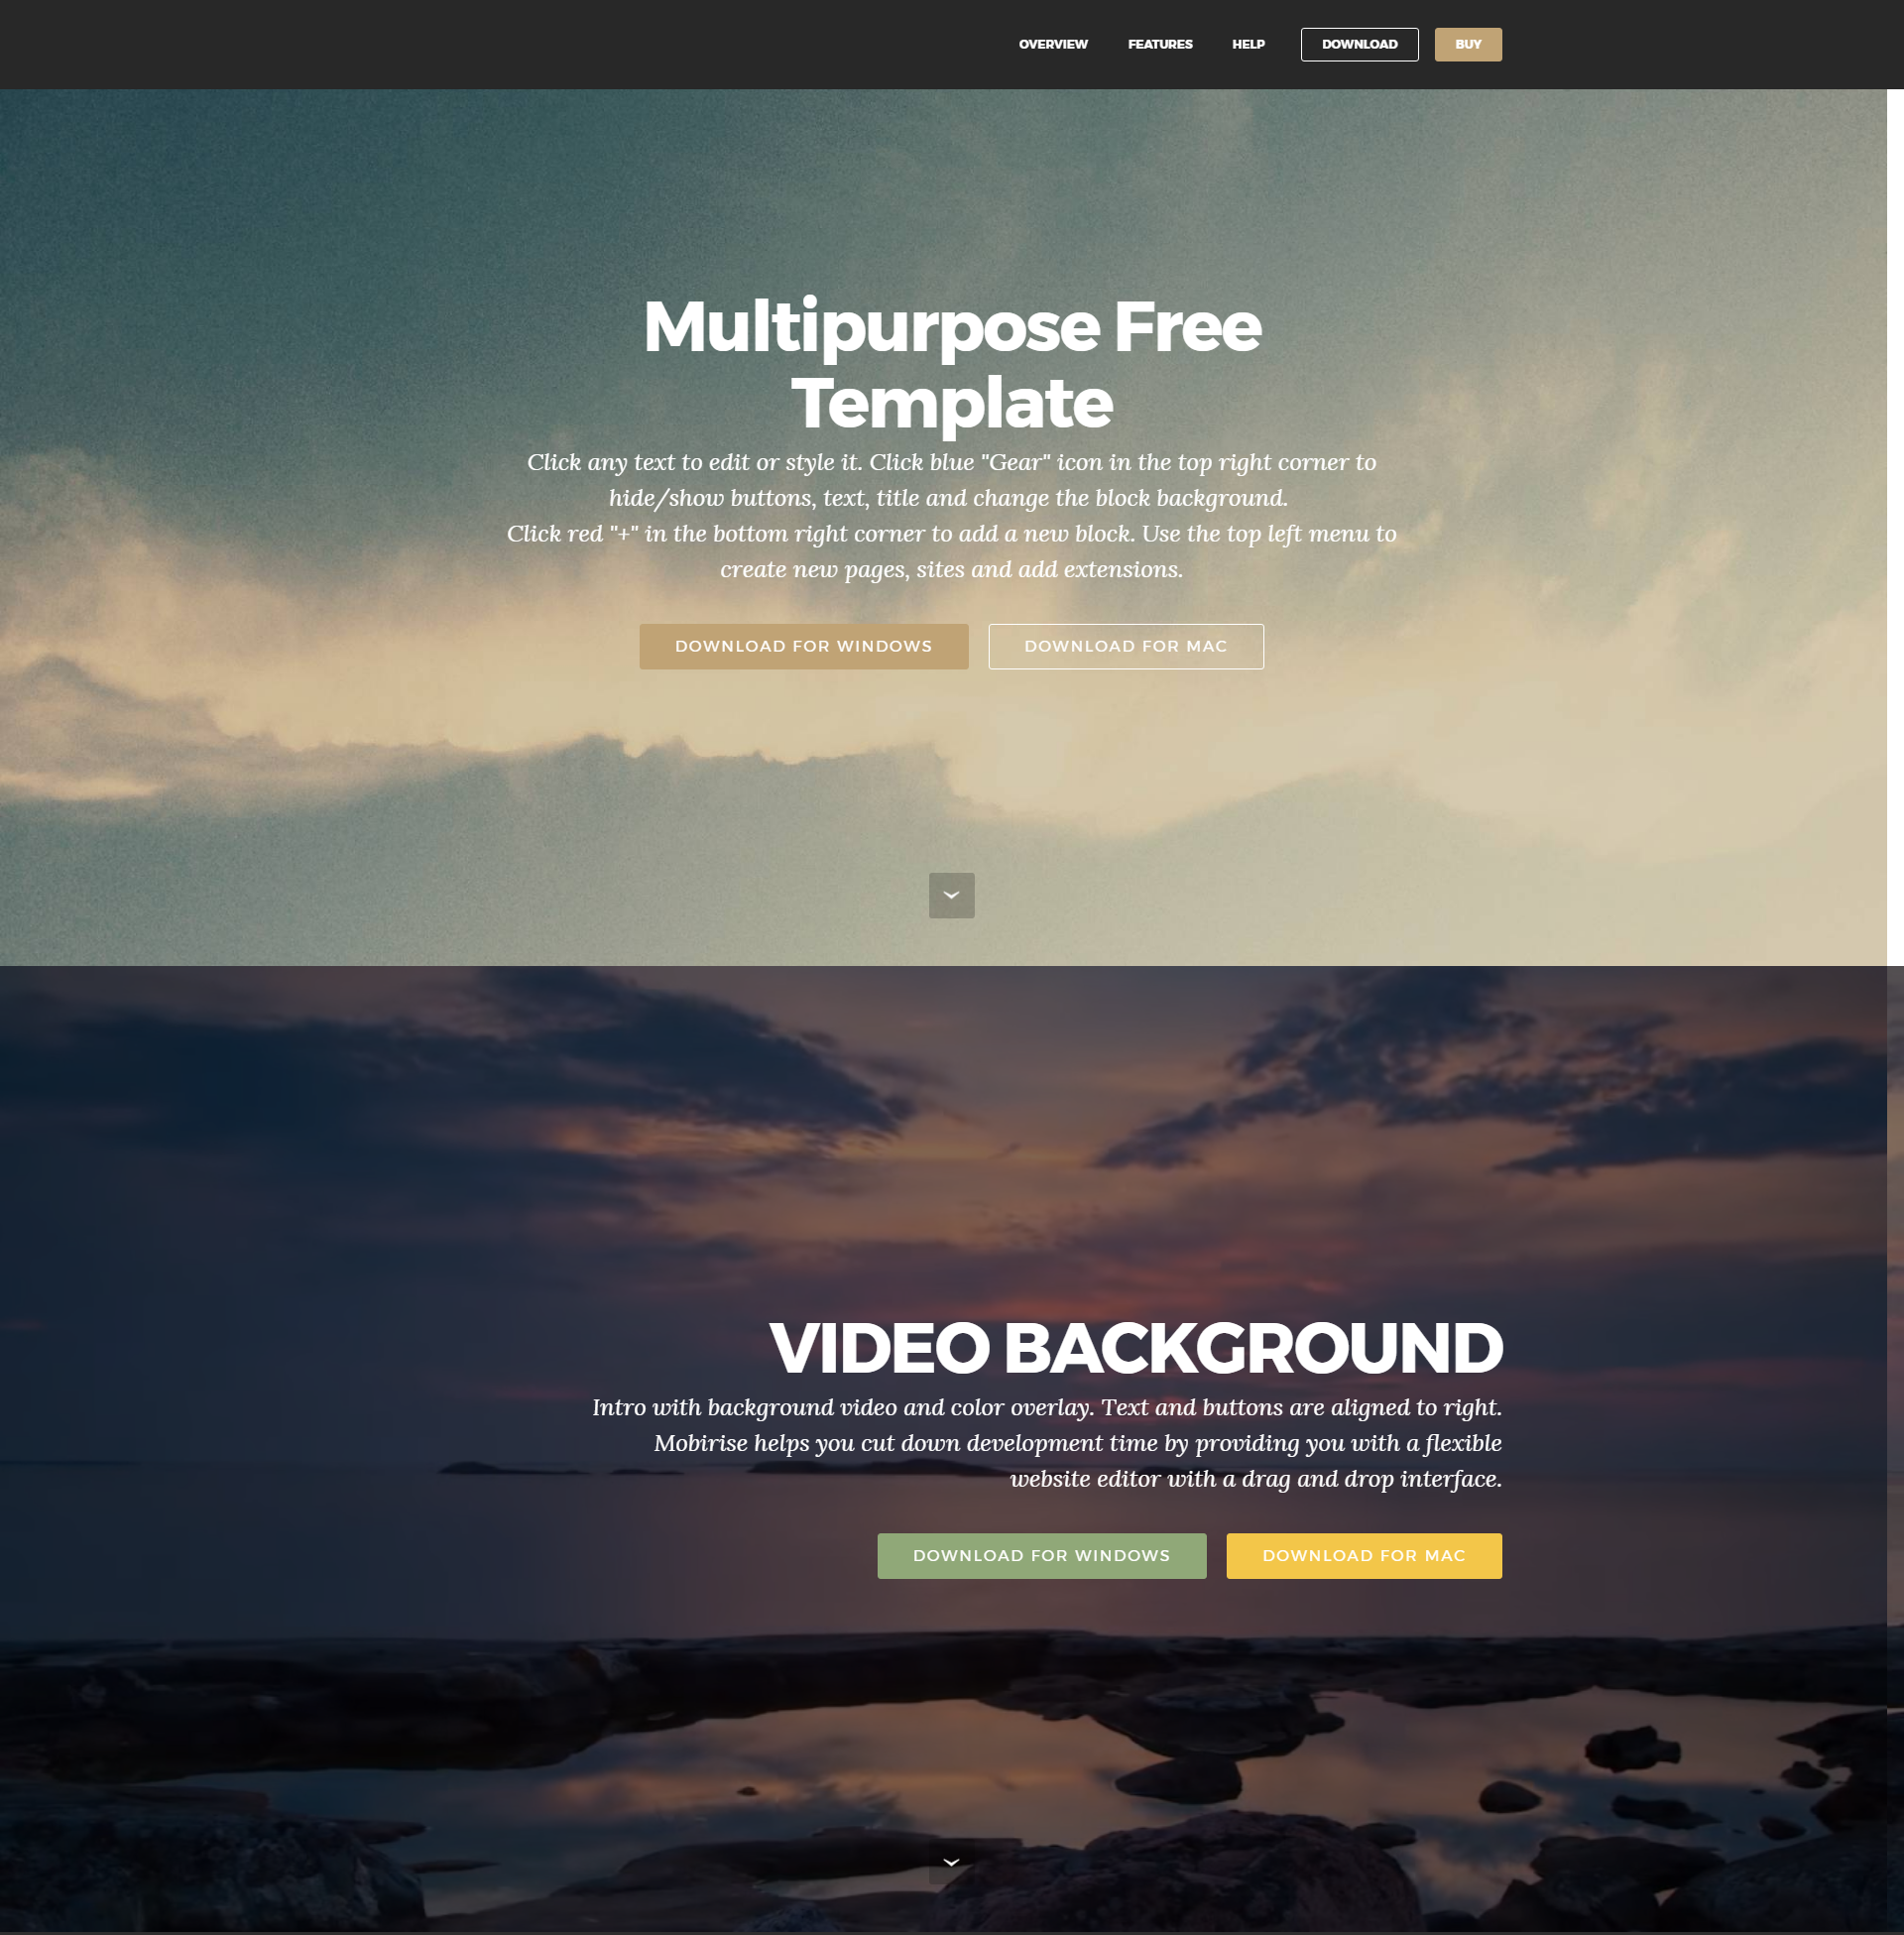 Free Download Bootstrap Themes